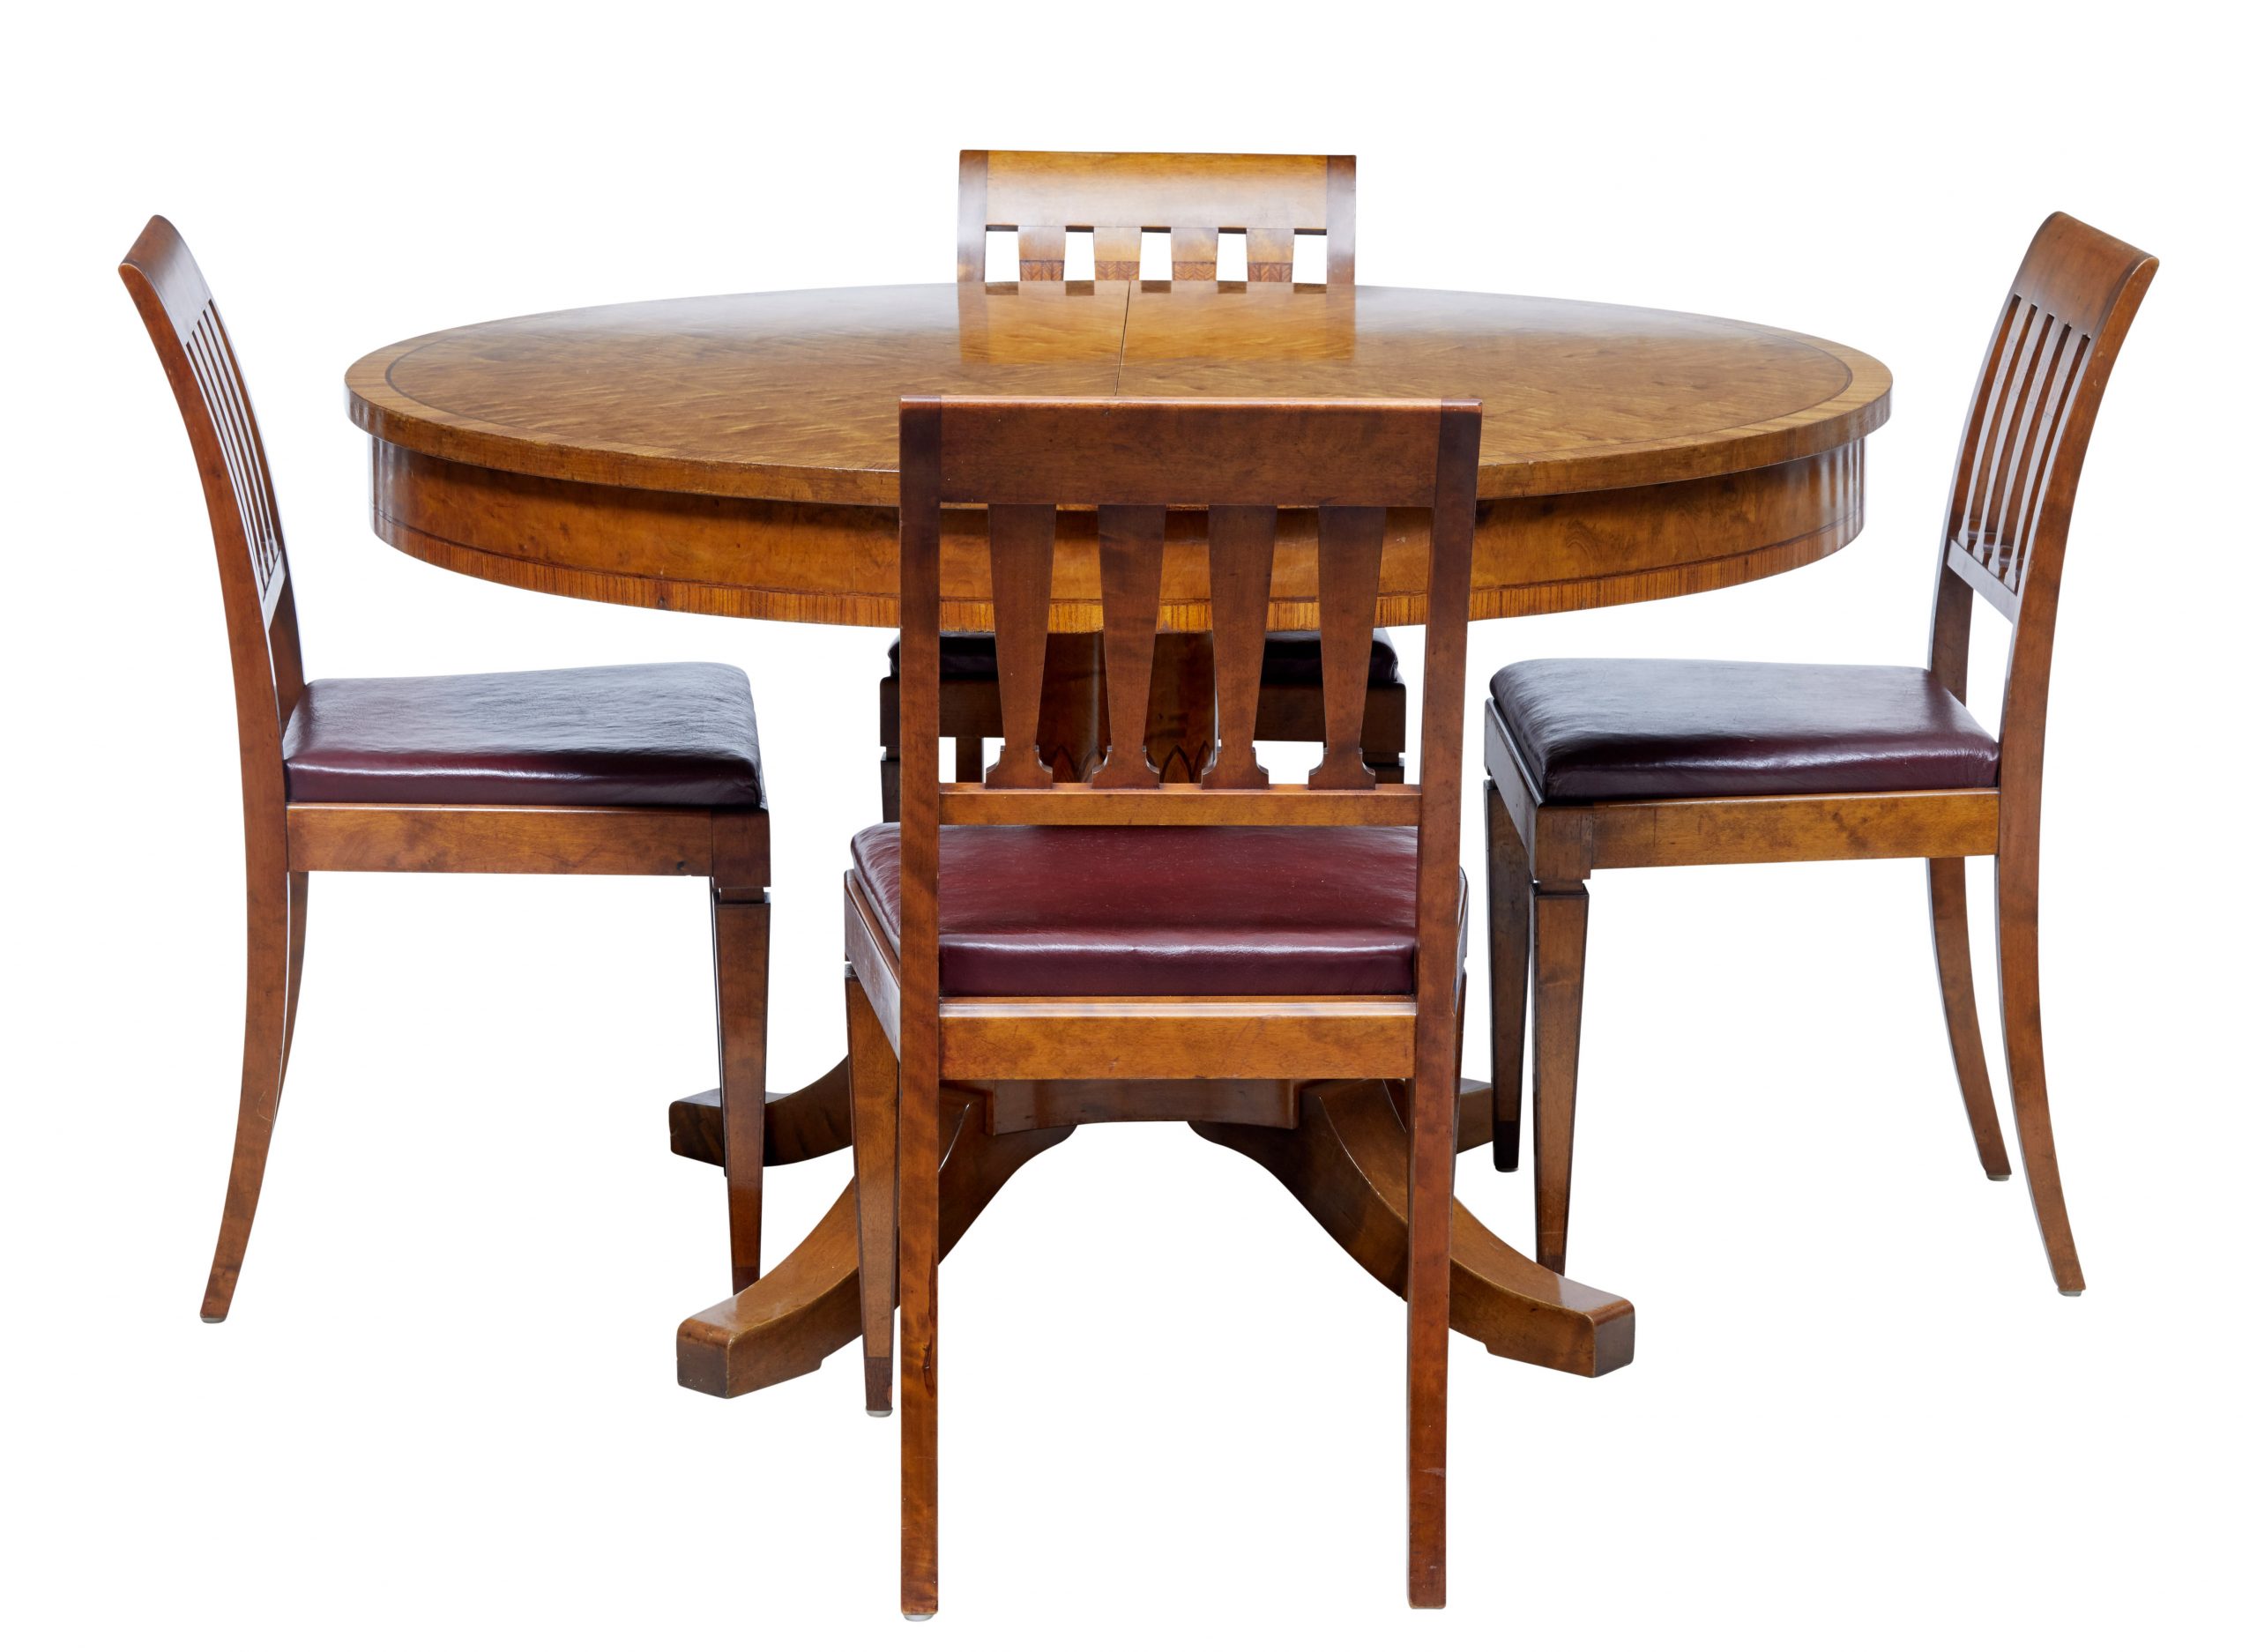 1920s Scandinavian Birch Dining Table And 4 Matching Chairs pertaining to measurements 5877 X 4302